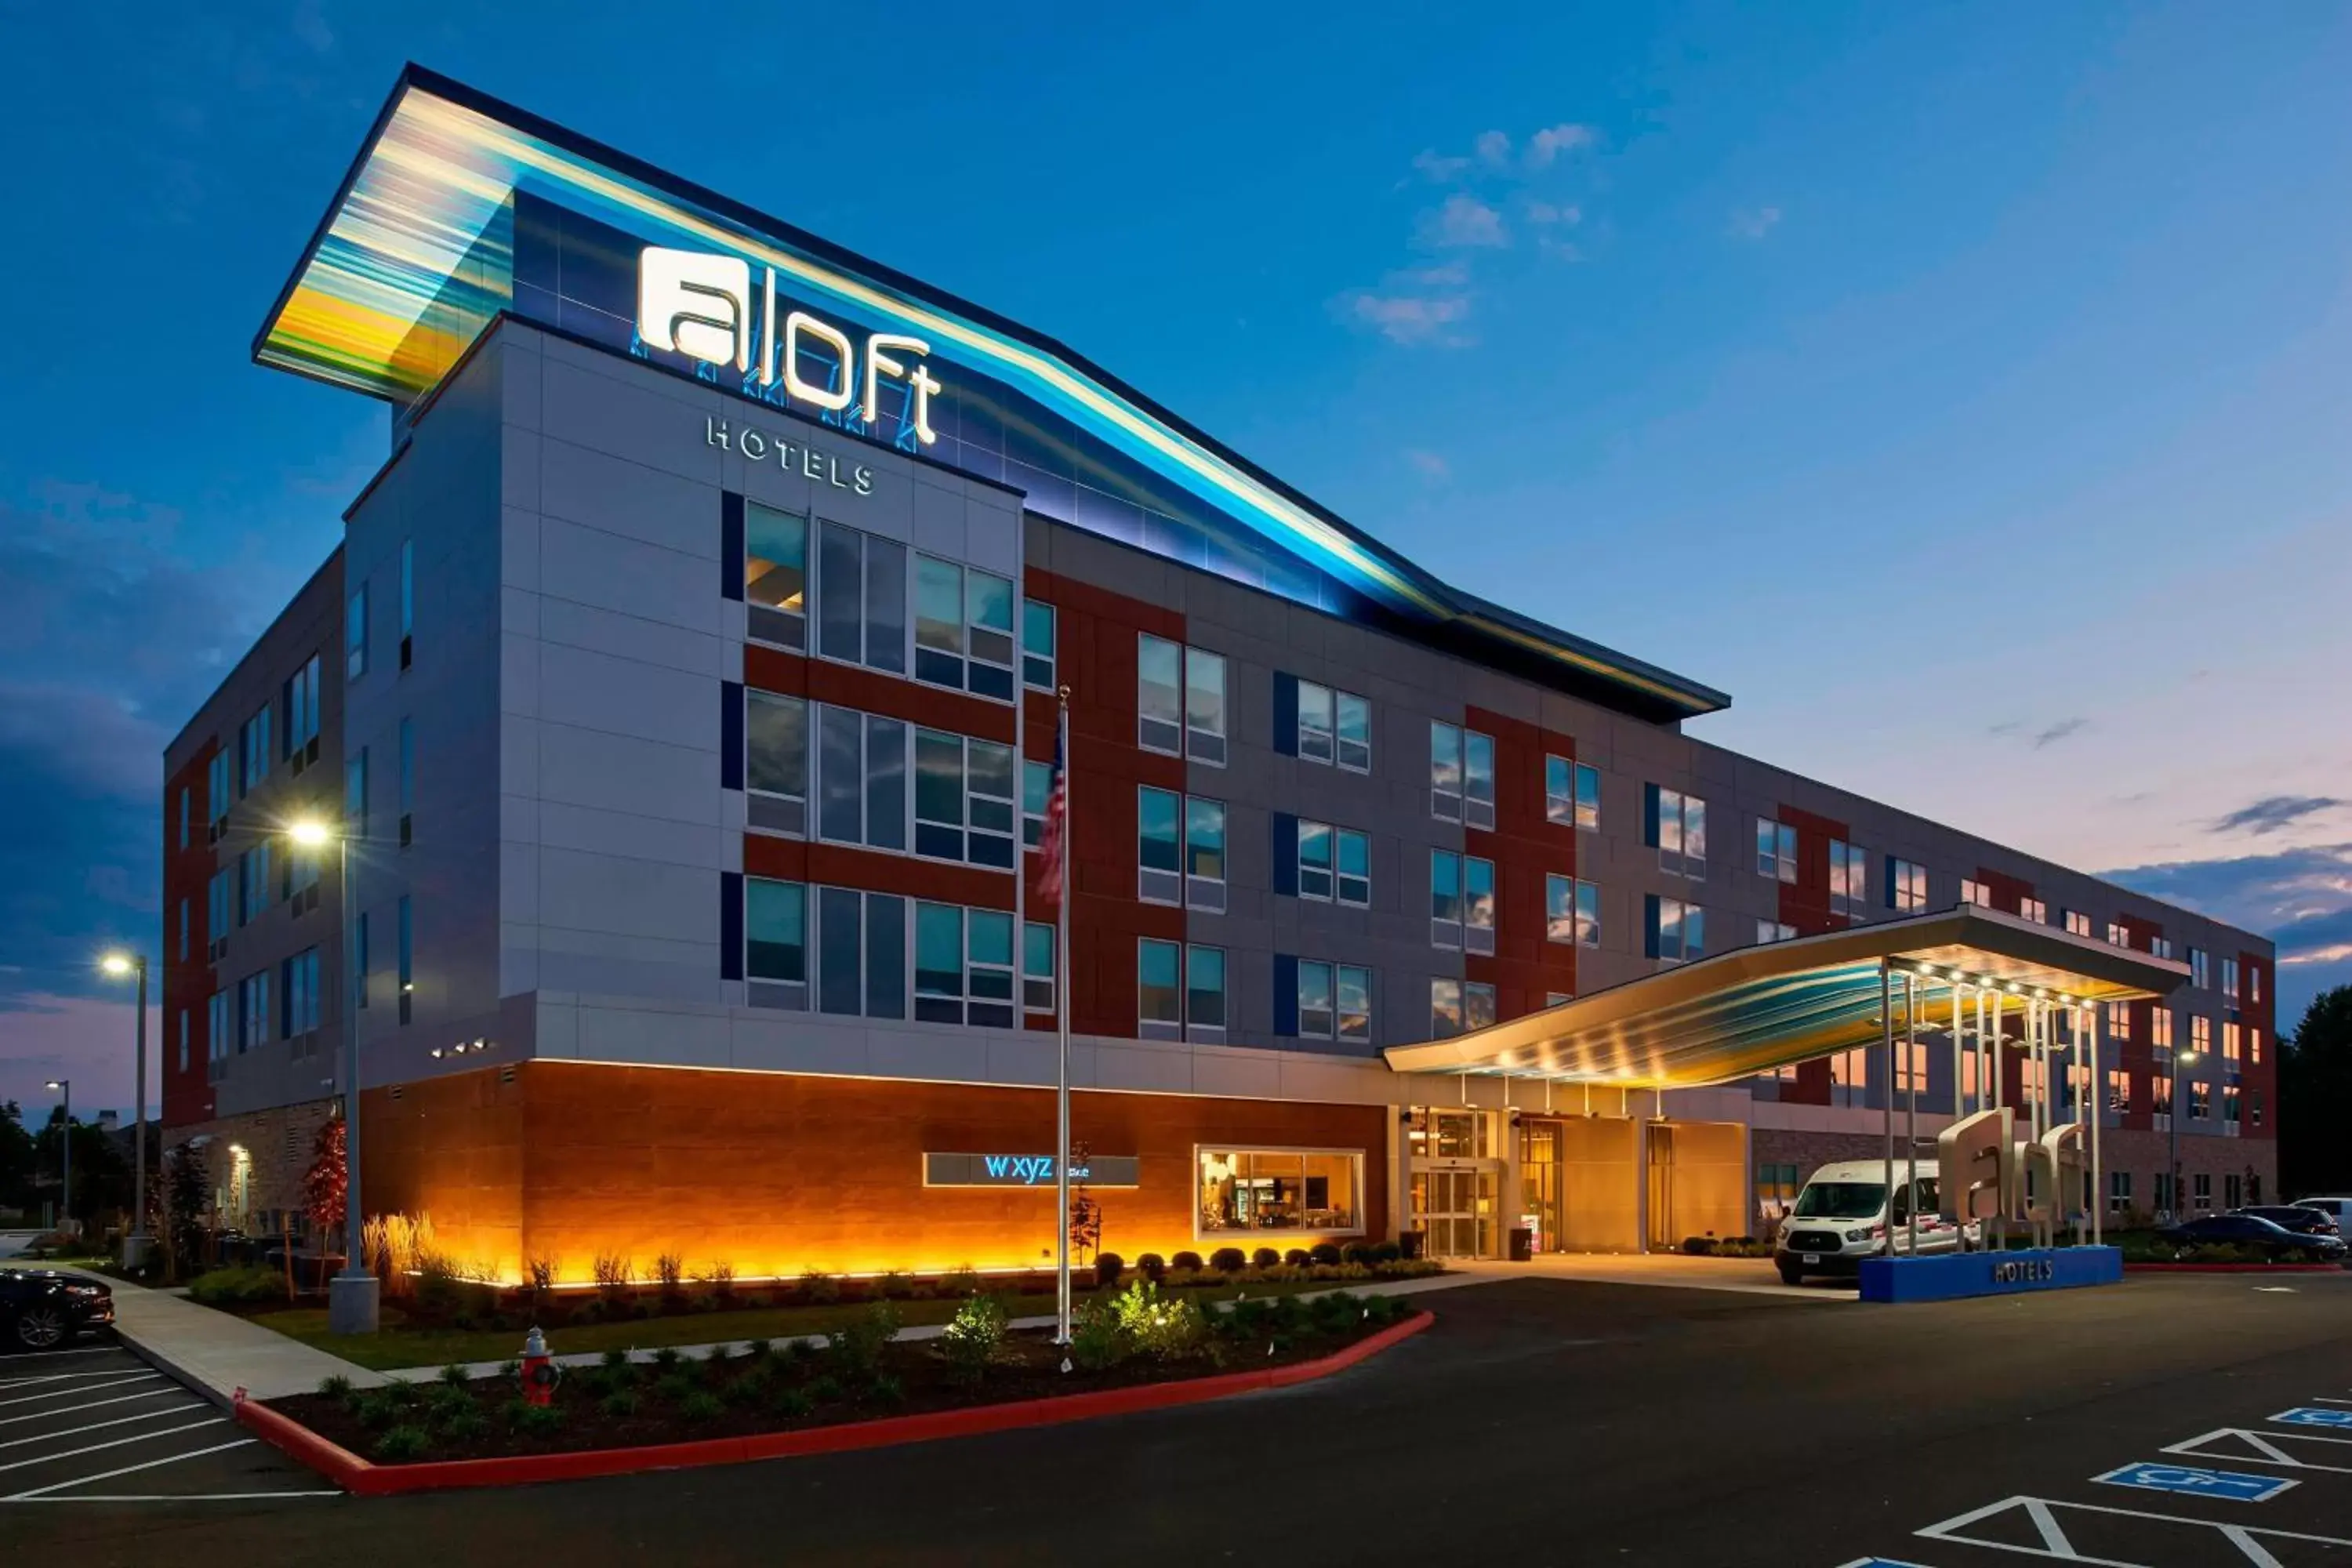 Property Building in Aloft Cleveland Airport